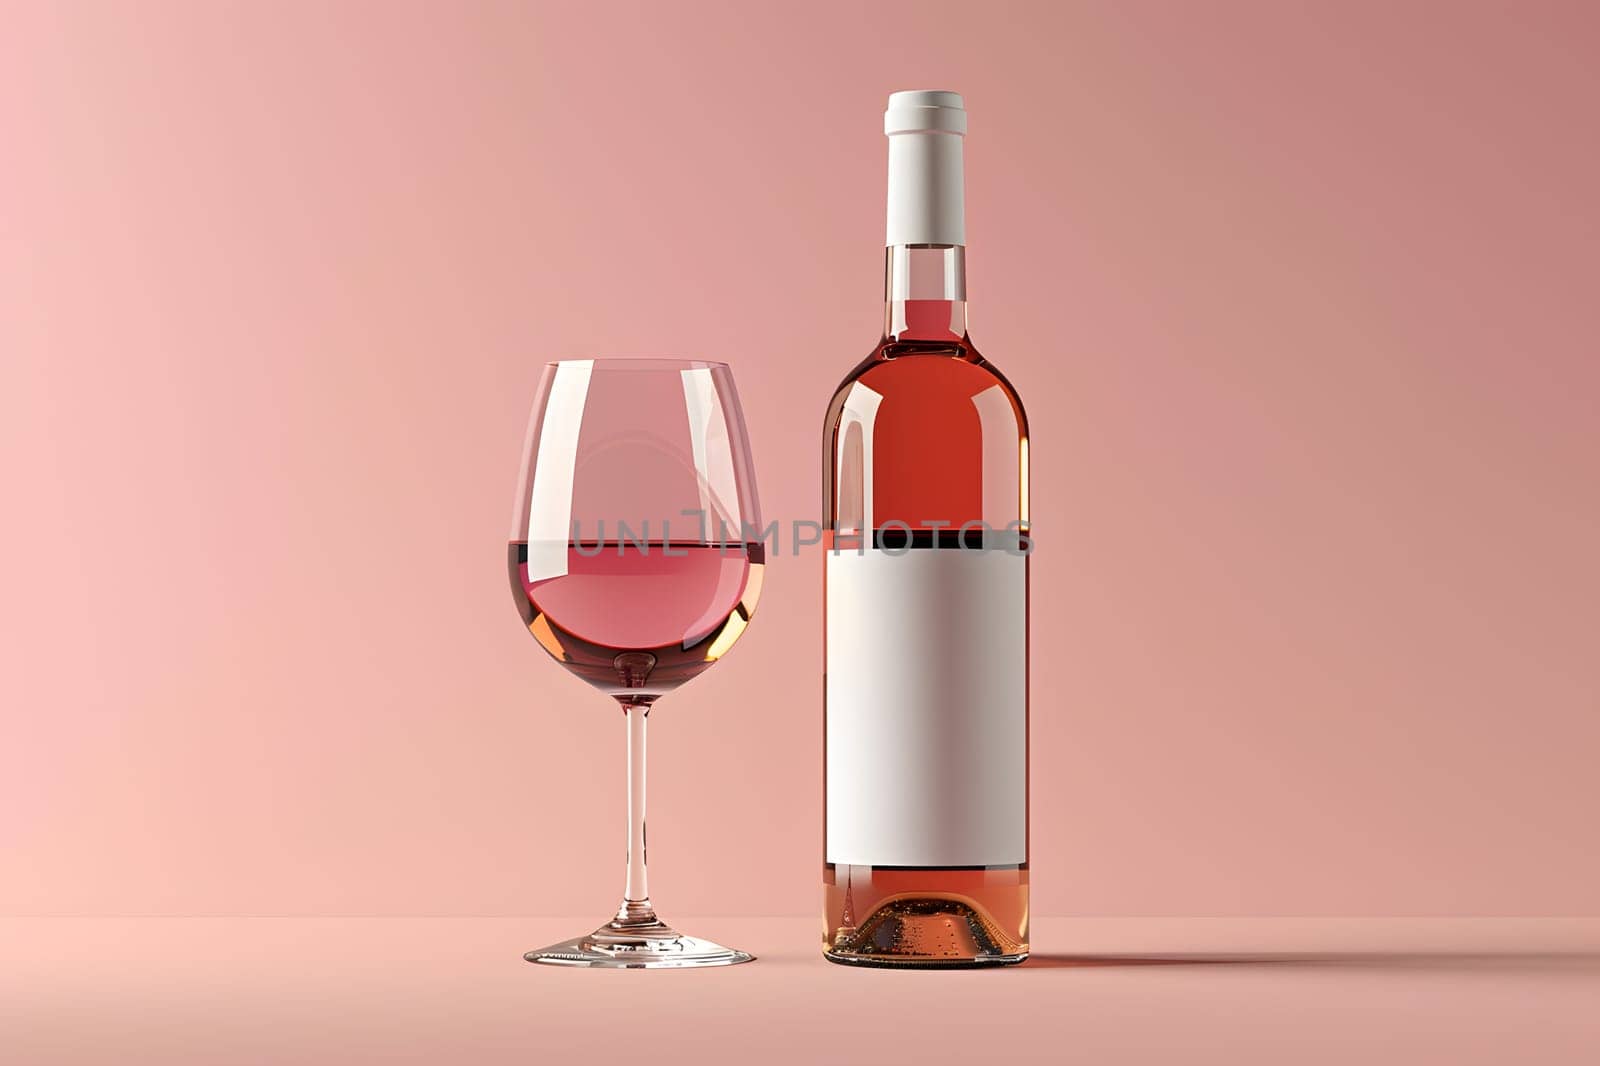 A glass of rose wine sits beside a glass bottle on a pink background. The liquid in the stemware reflects the soft lighting, creating a romantic and inviting ambiance